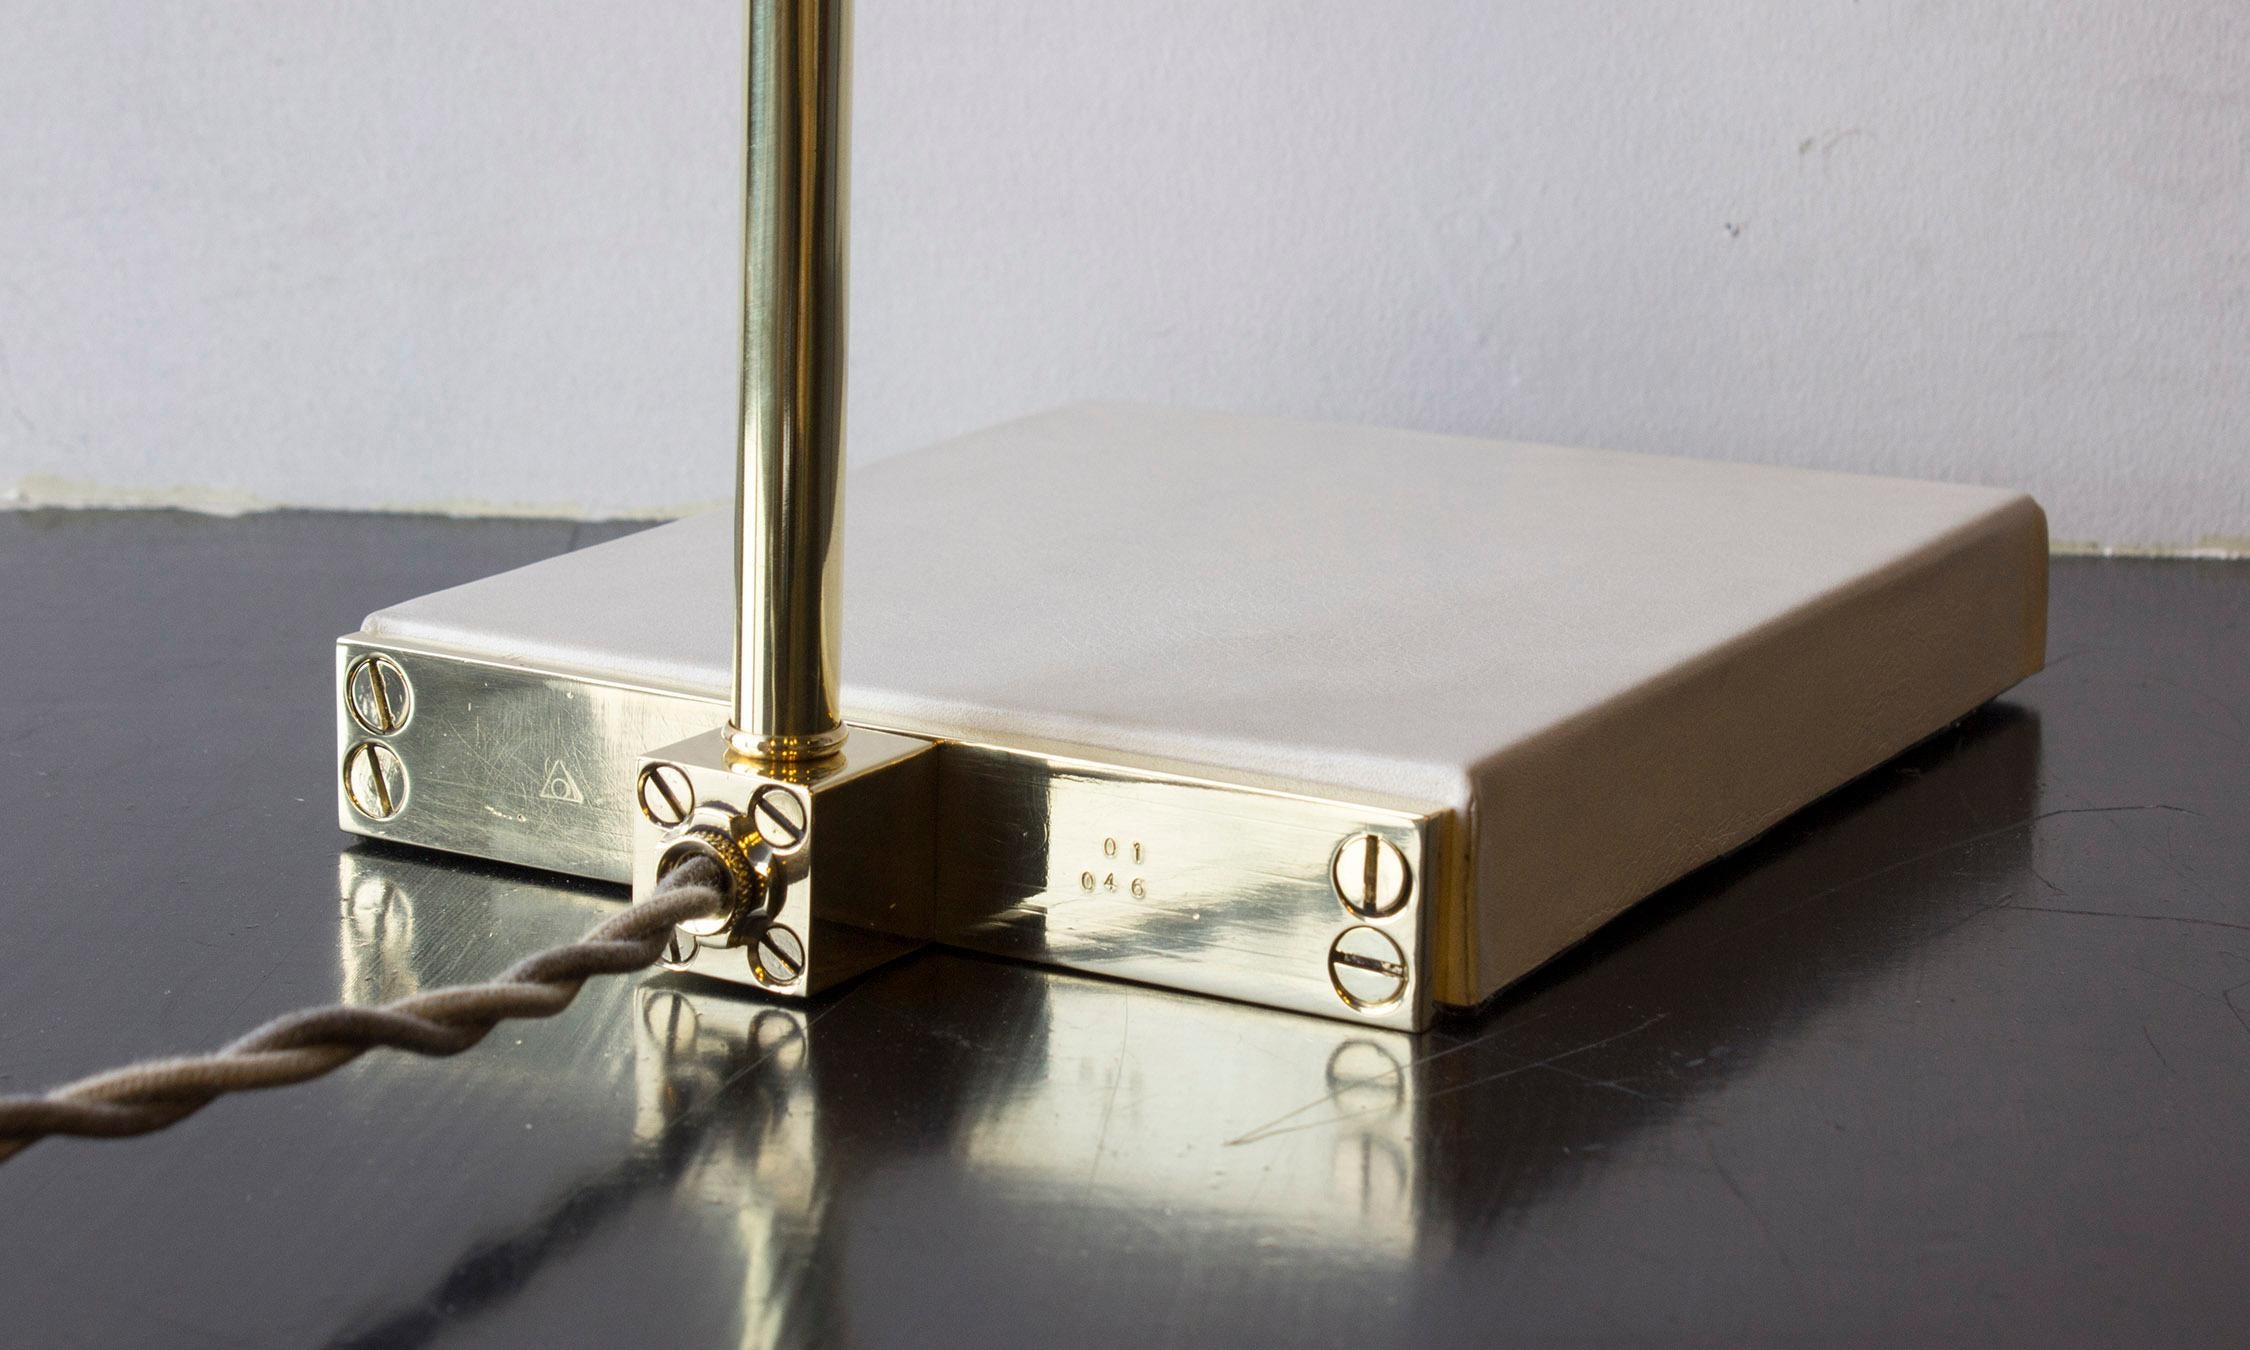 Bauhaus Series01 Desk Lamp, Hand-Dyed Ash 'Gray' Leather, Polished Unlacquered Brass For Sale